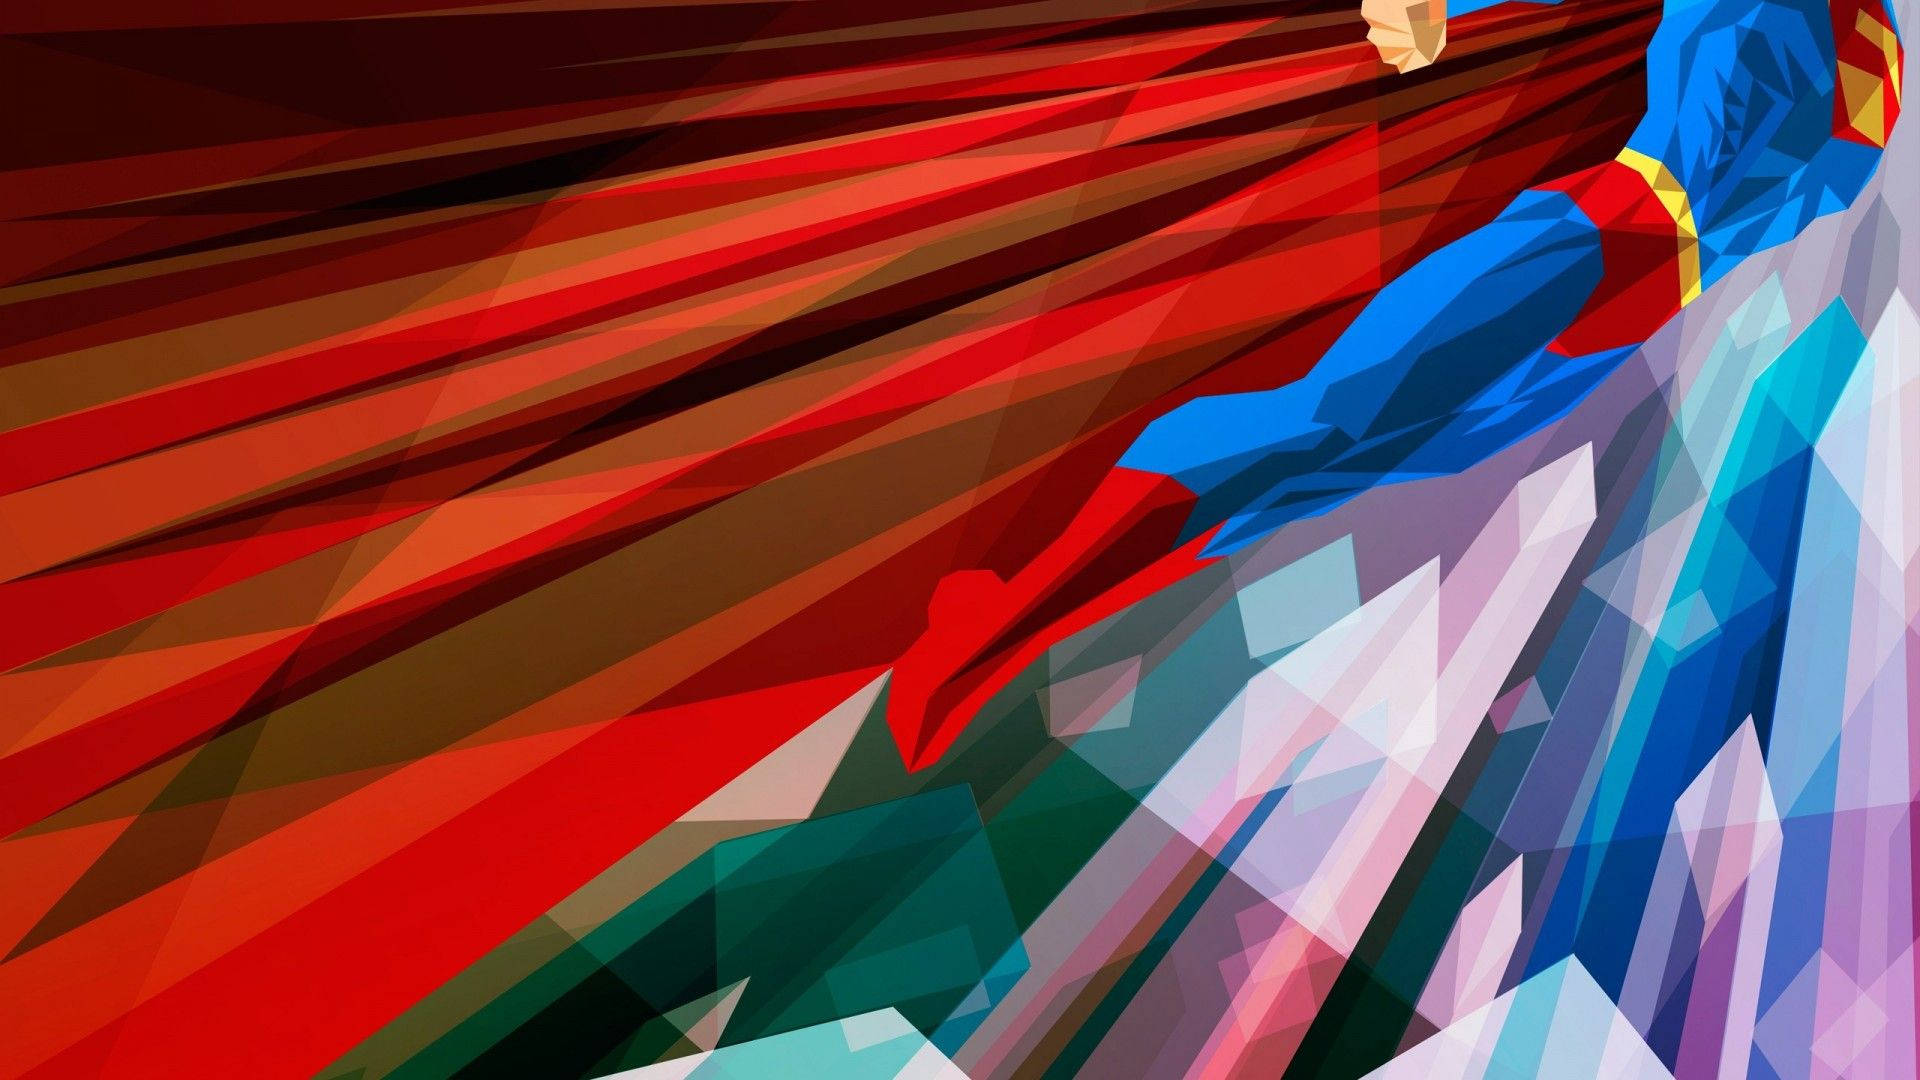 Superman Flying In The Air With A Colorful Background Background